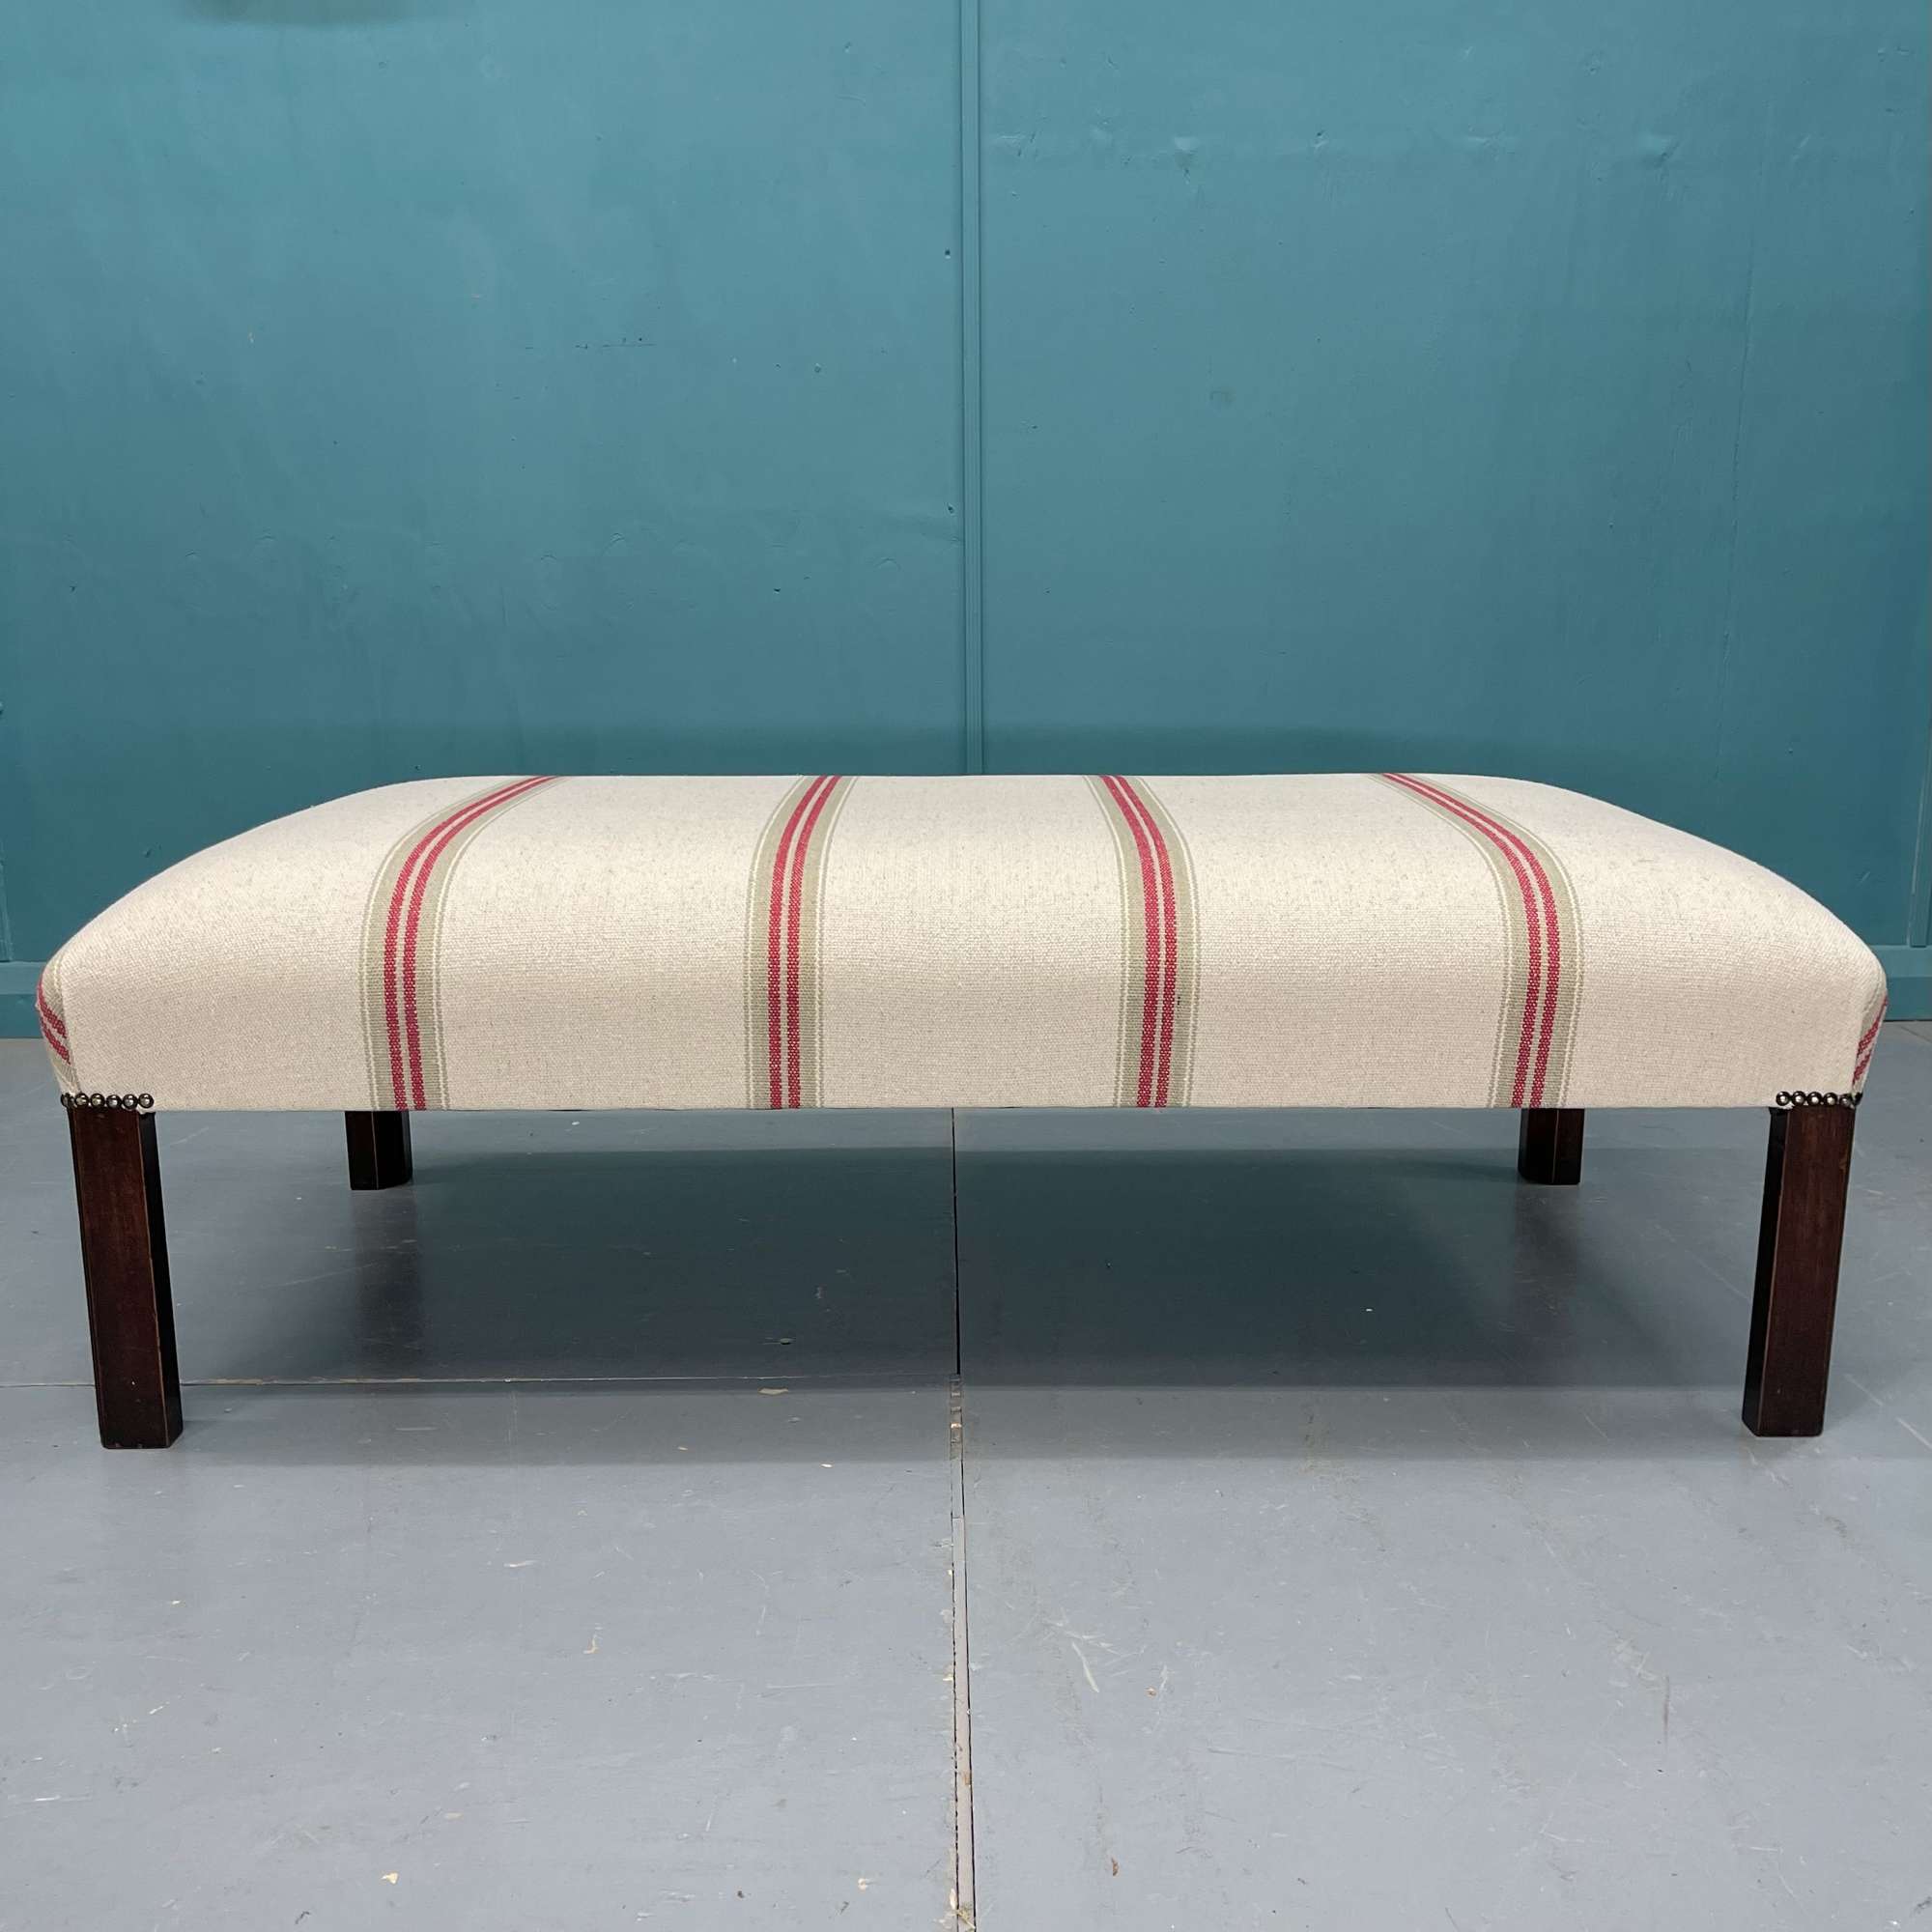 Newly upholstered heavy ticking stripe footstool